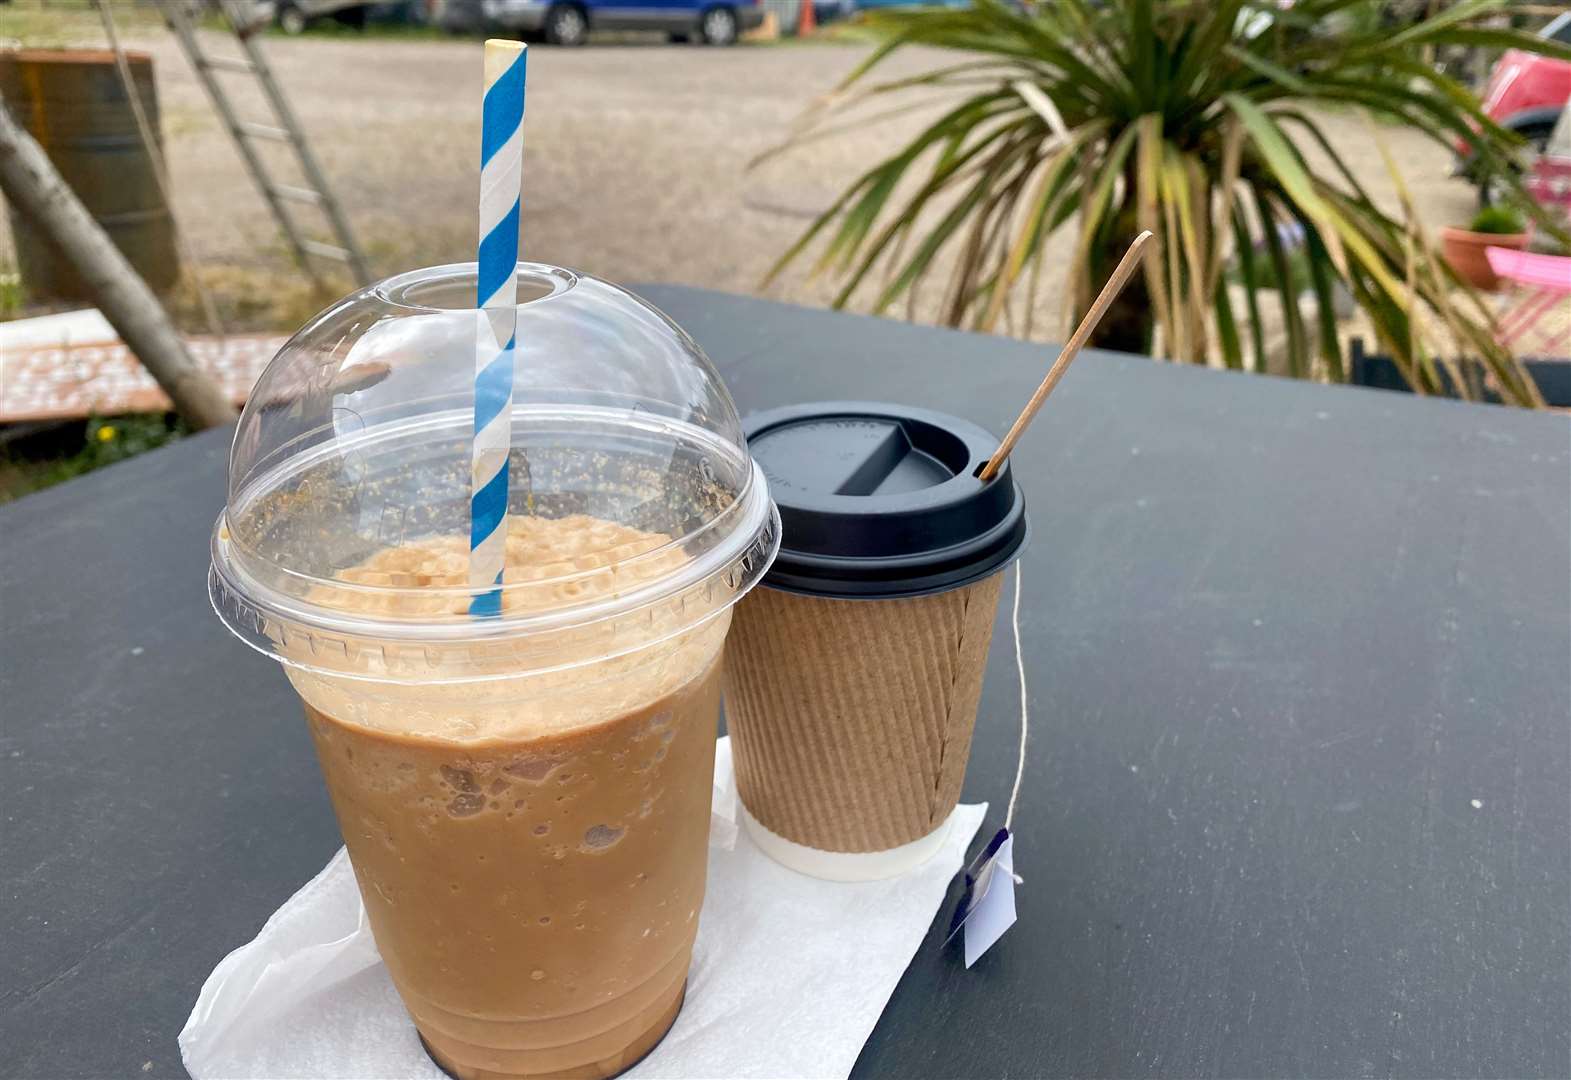 The coffee frappe and green tea with lemon were served up first. Picture: Sam Lawrie